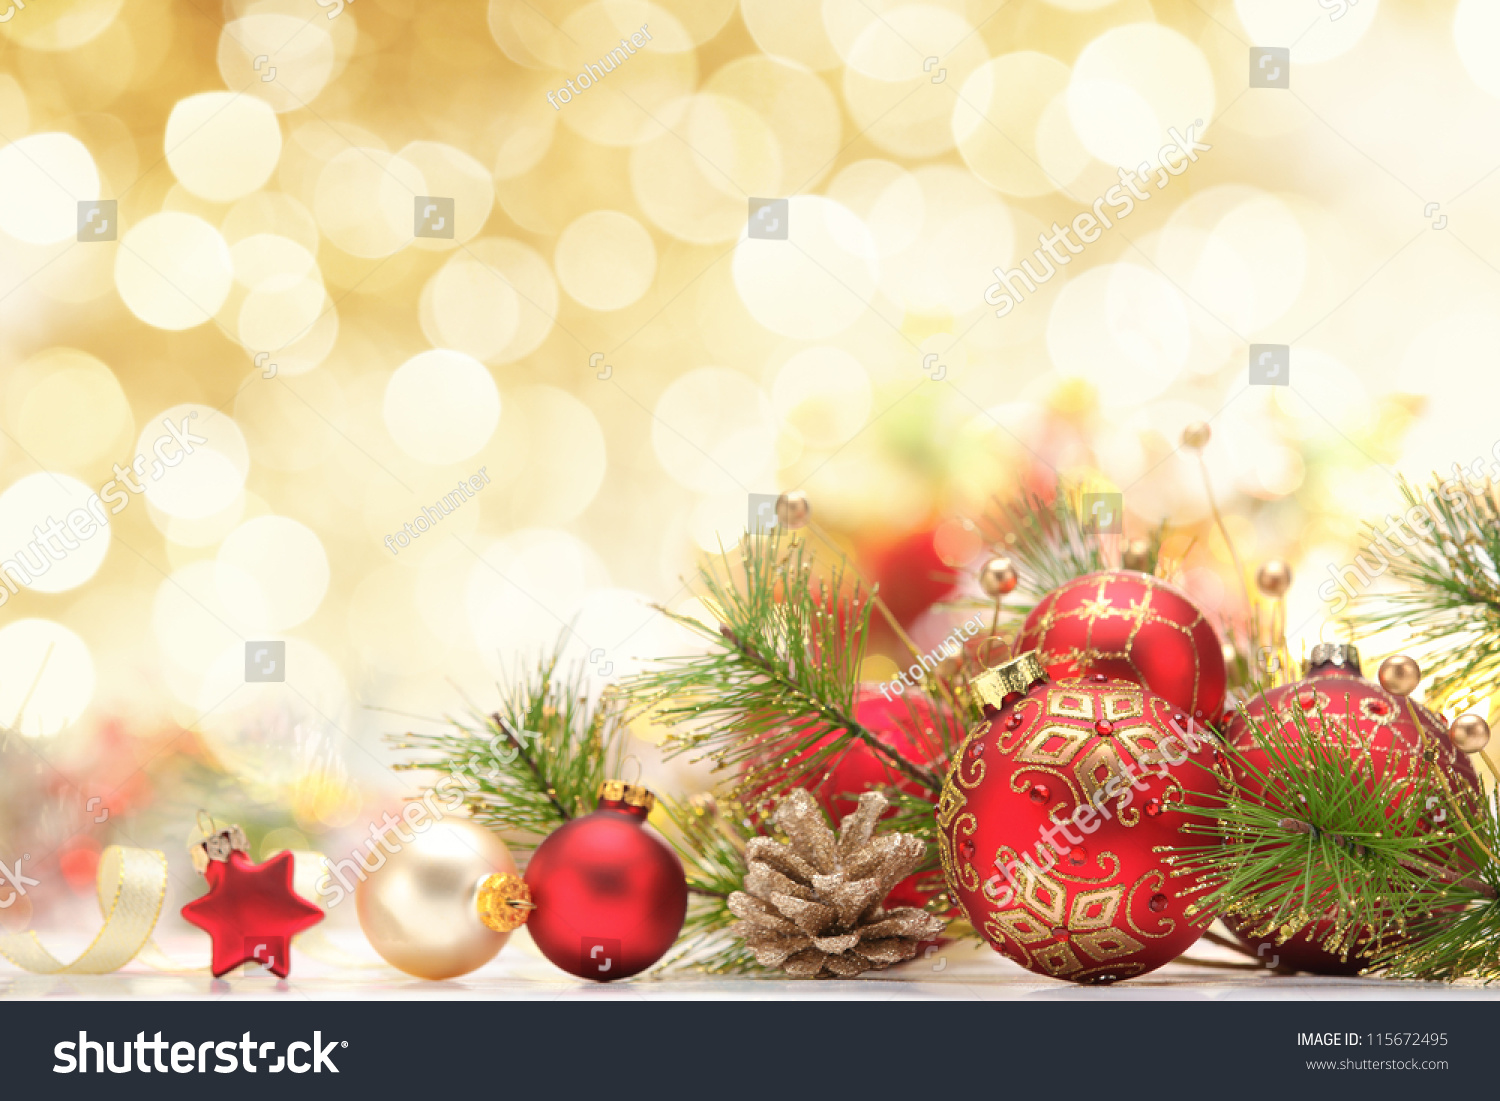 Christmas Decoration On Abstract Background Stock Photo 115672495 ...